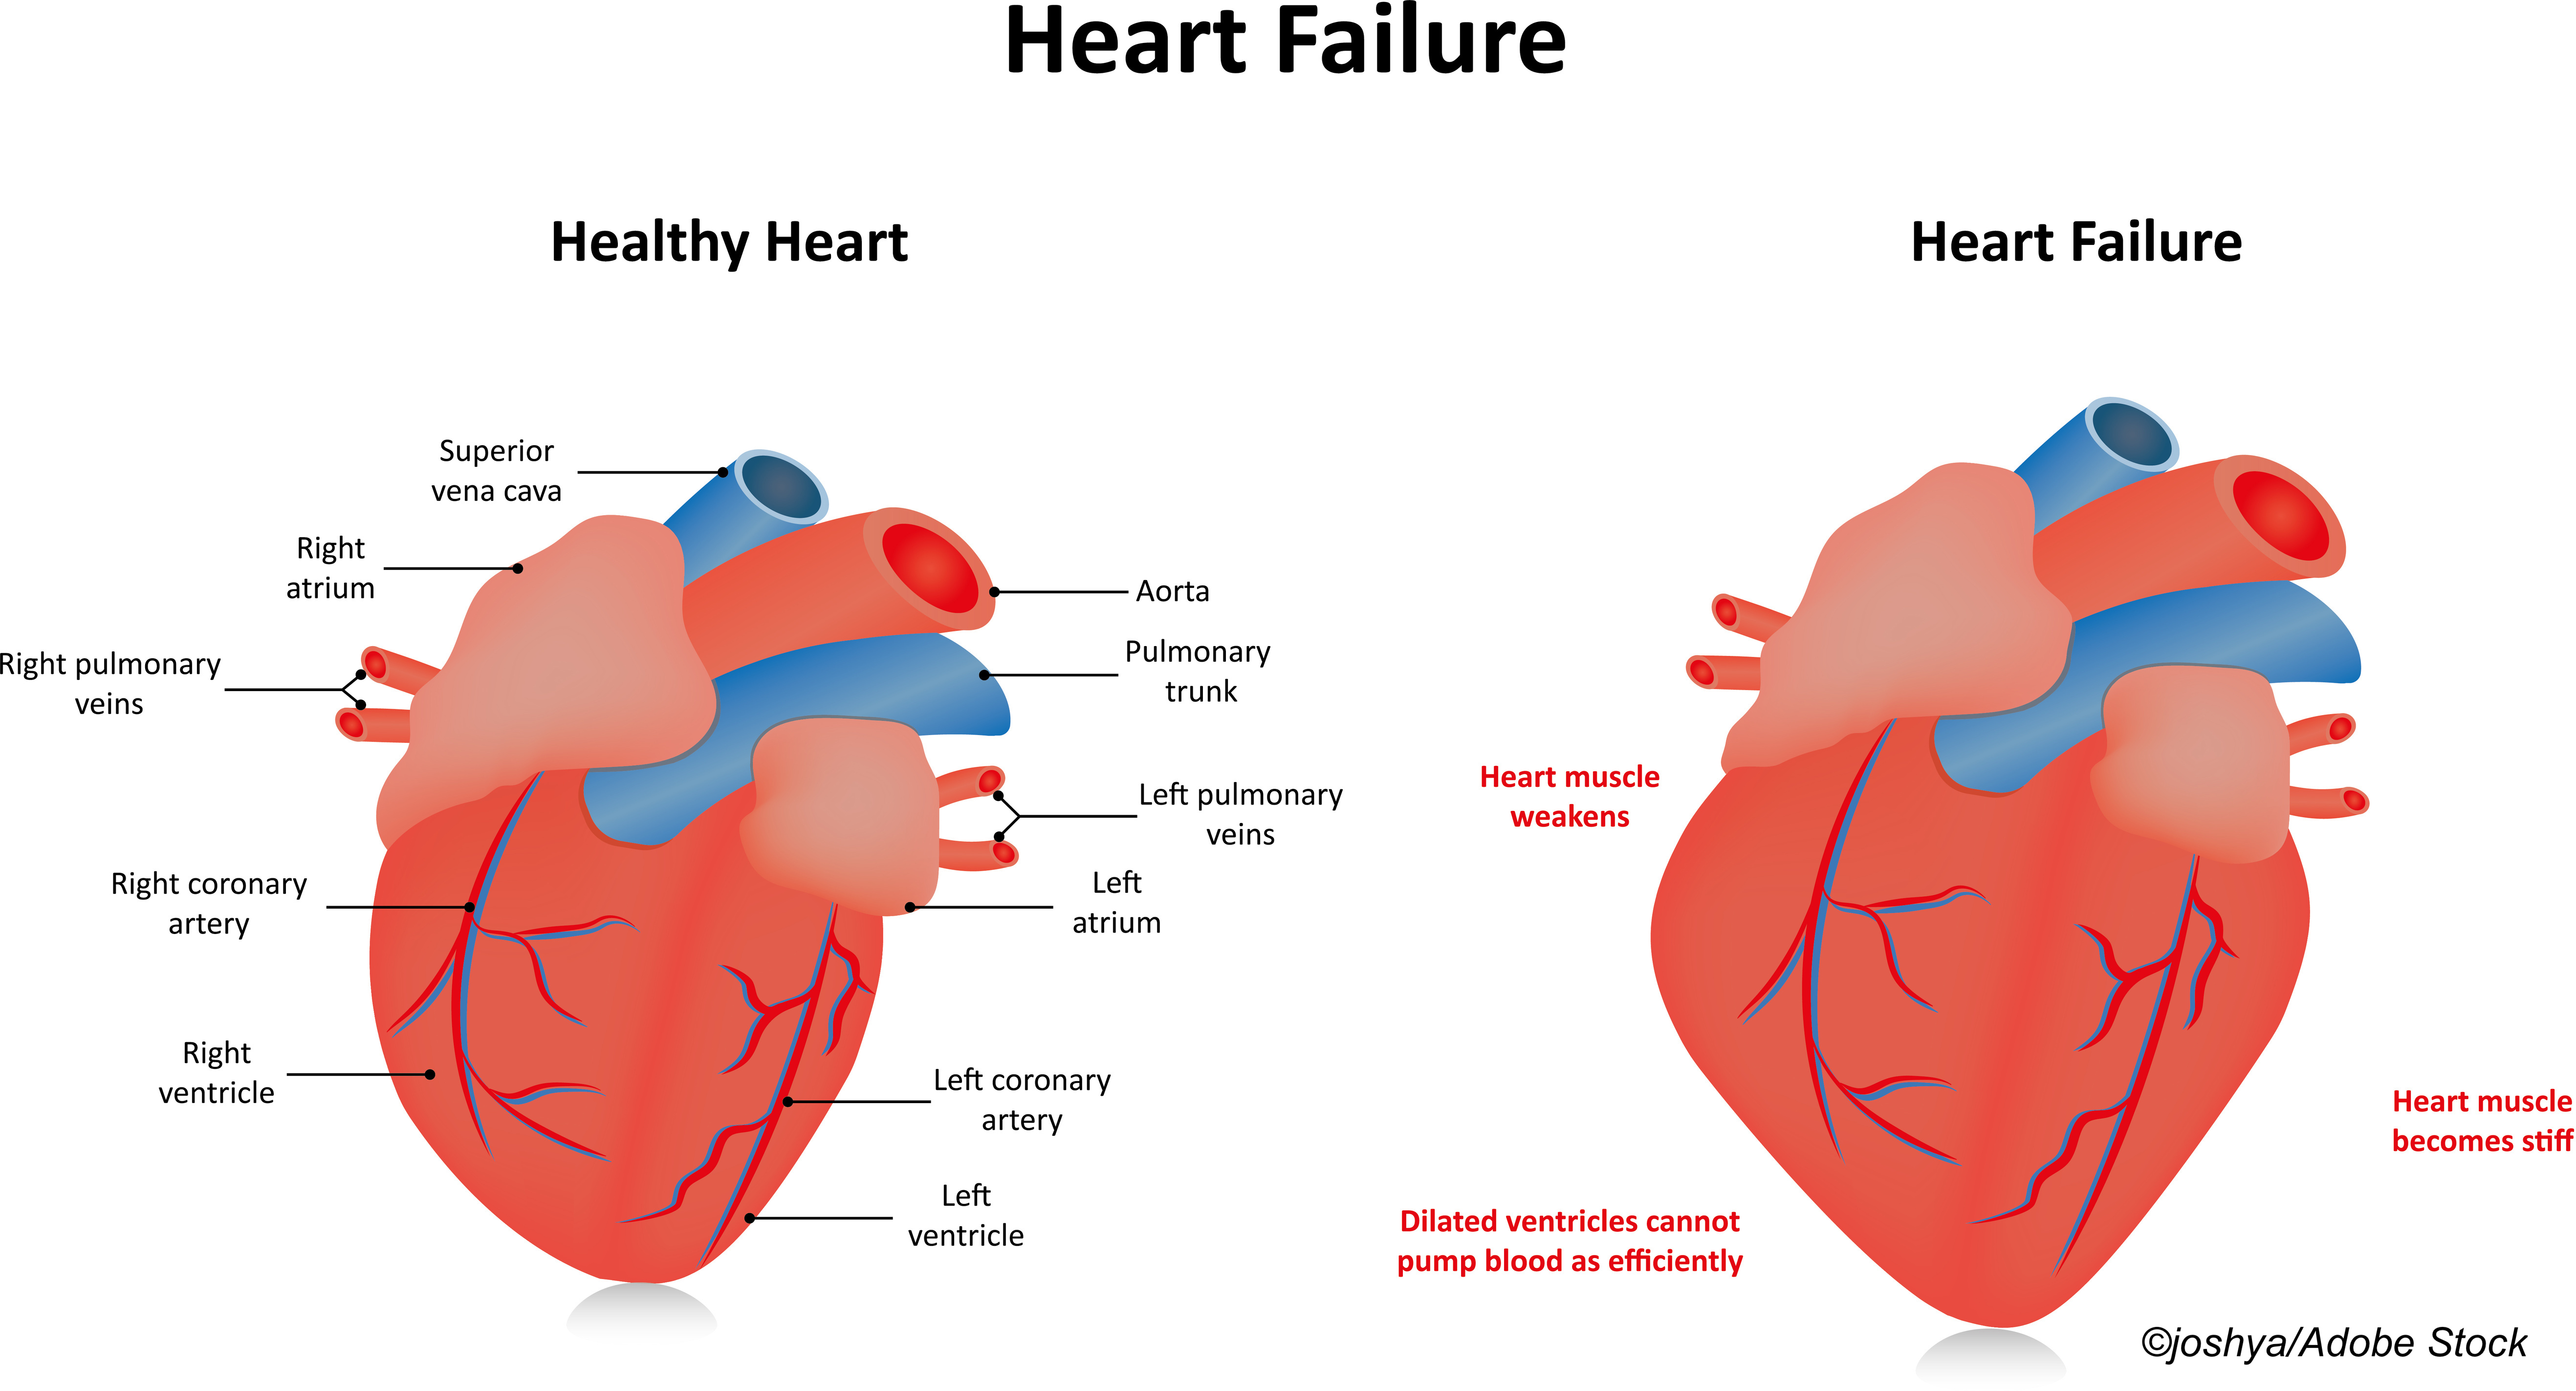 ESC: Empagliflozin Conquers Heart Failure with Preserved Ejection Fraction… Really